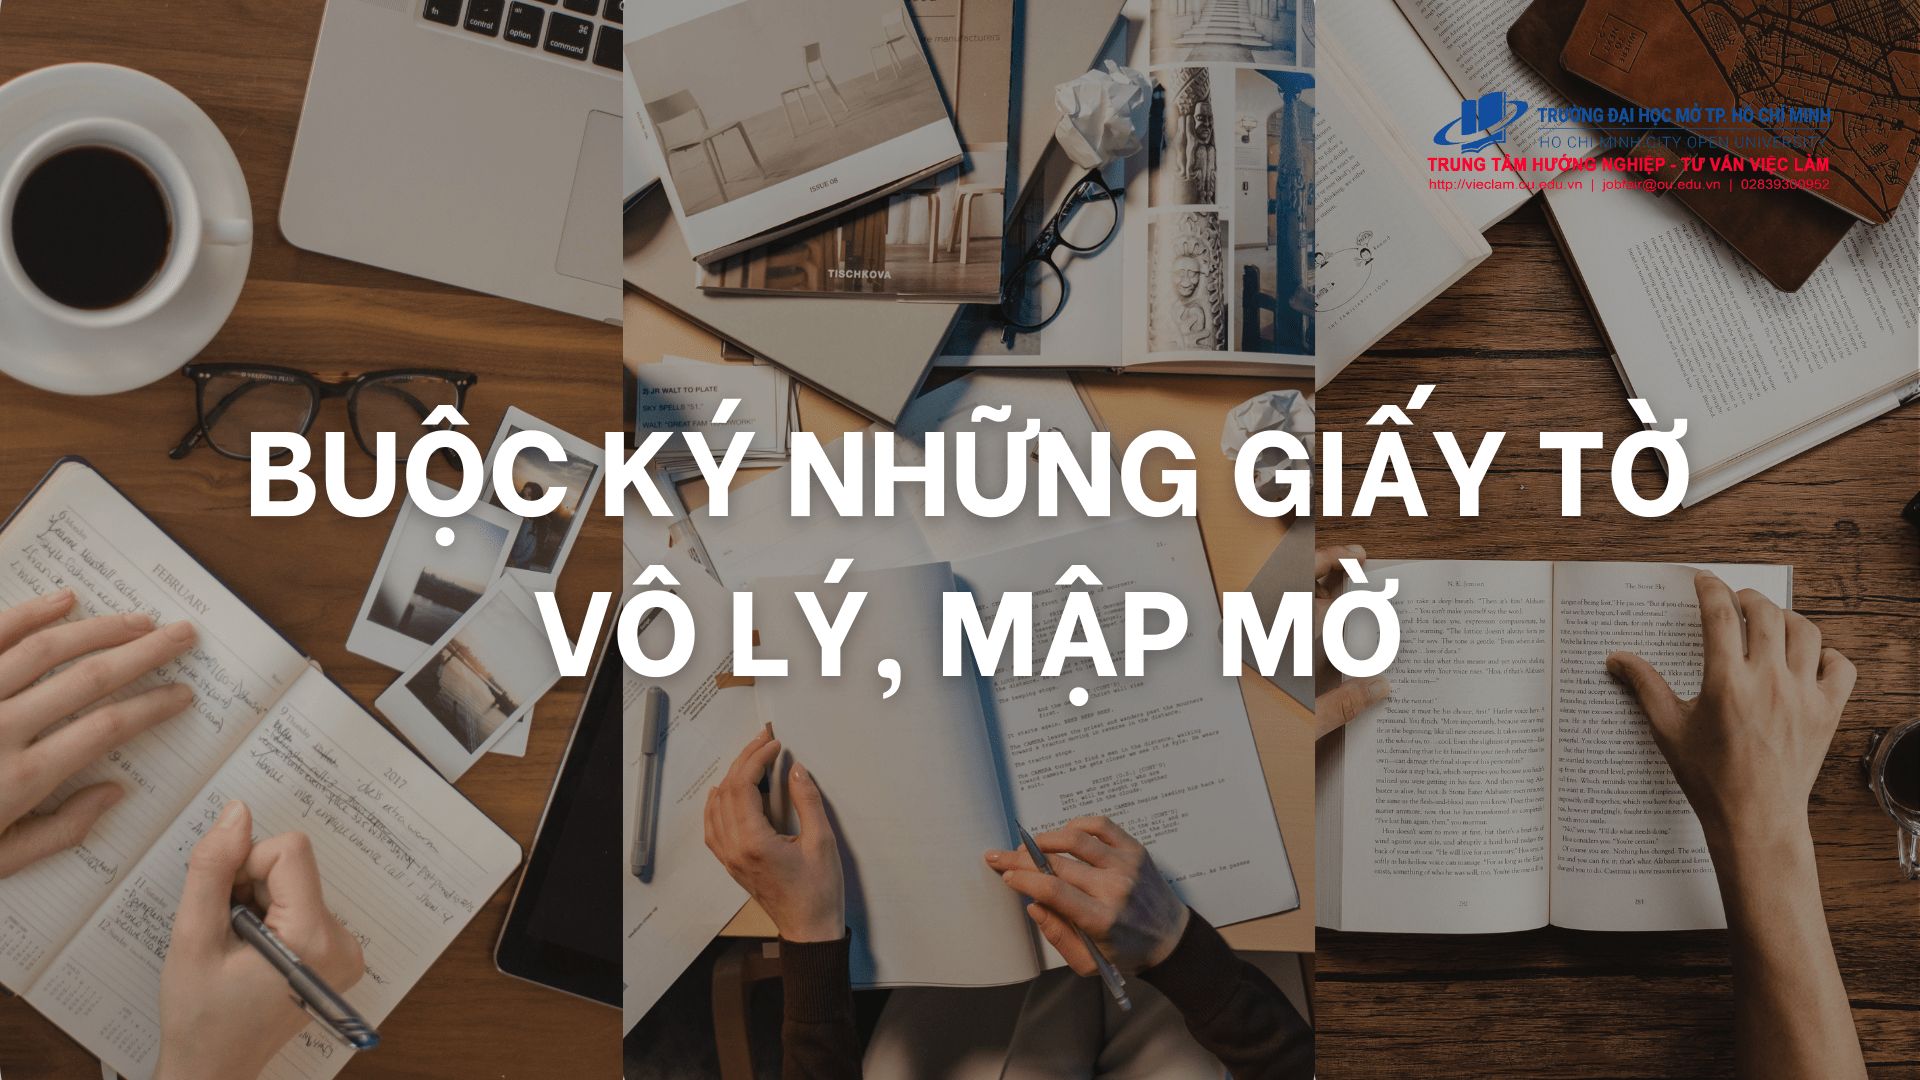 buoc-ky-nhung-giay-to-vo-ly-map-mo-min